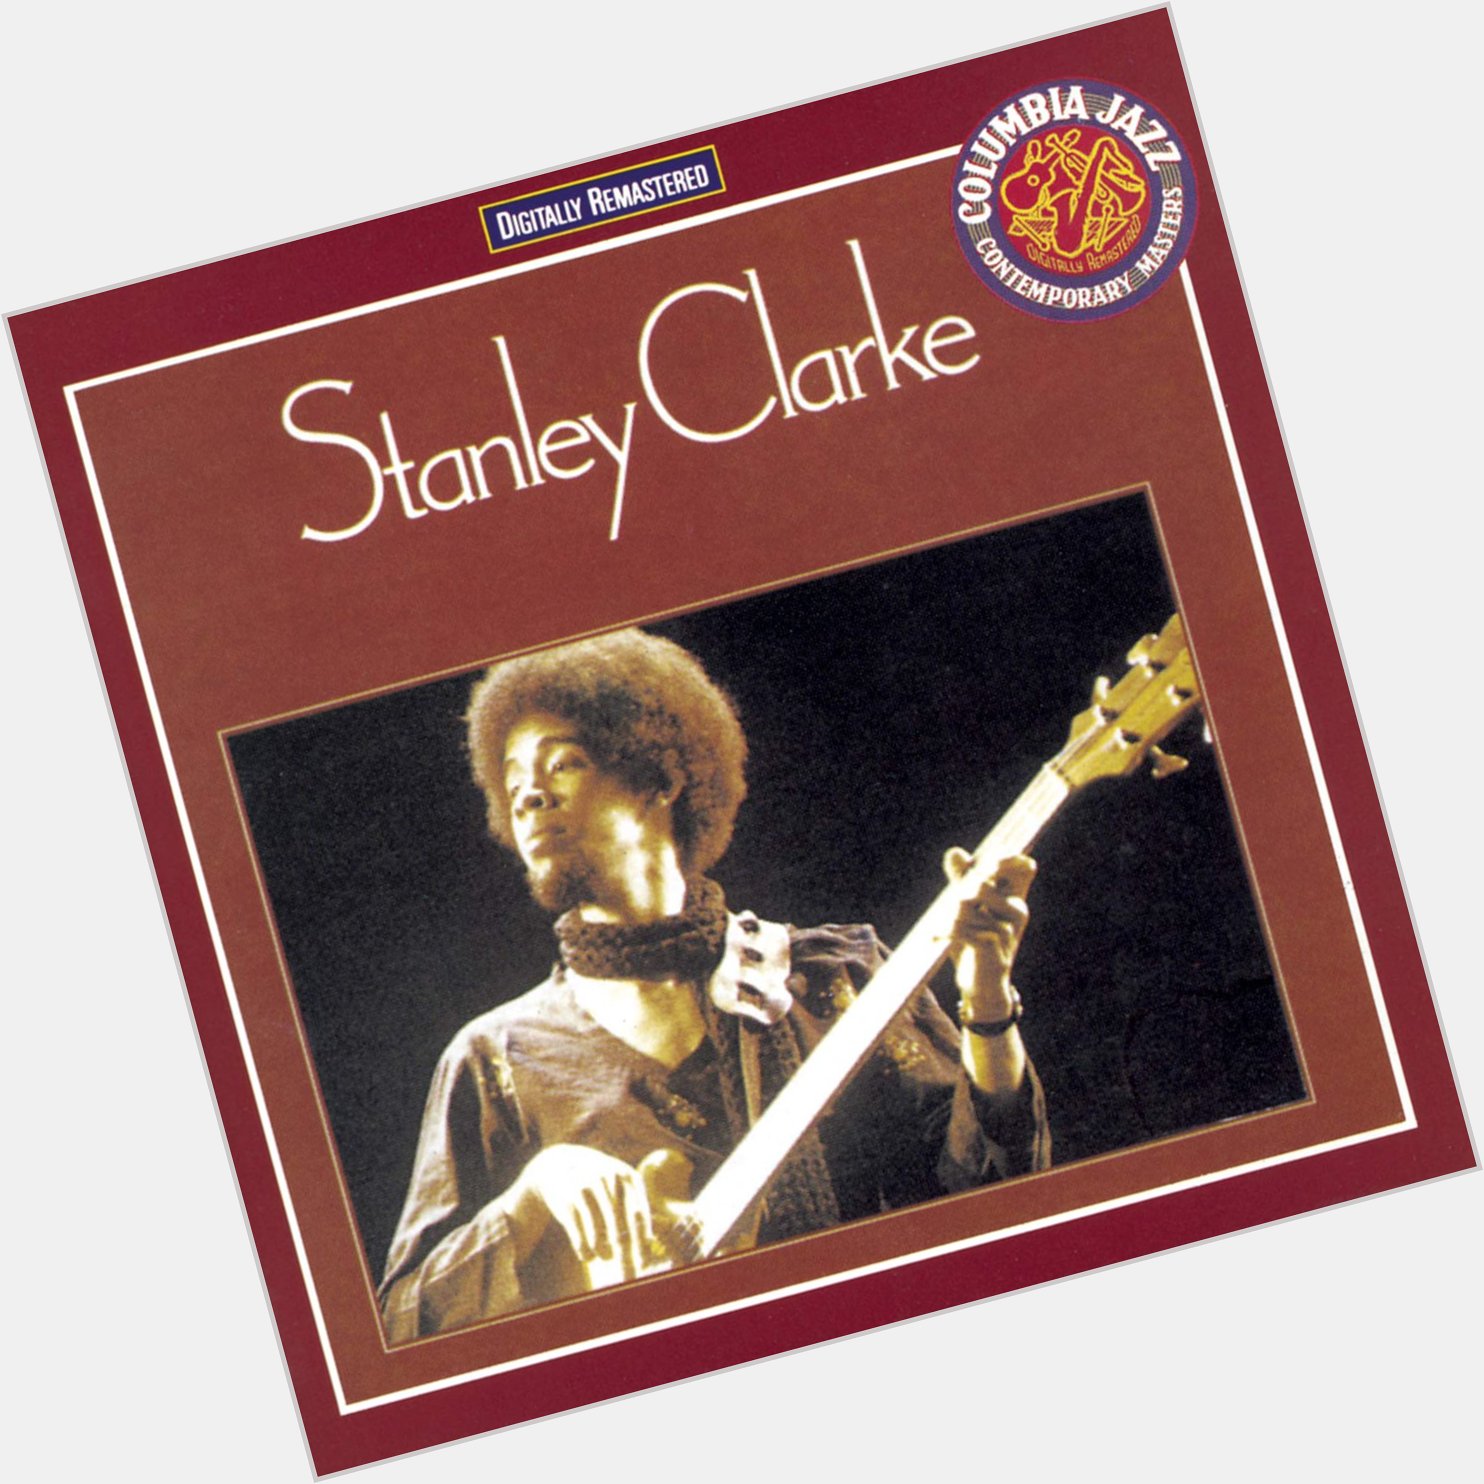 I wore this lp out in 77\  Happy Birthday Stanley Clarke  1951 